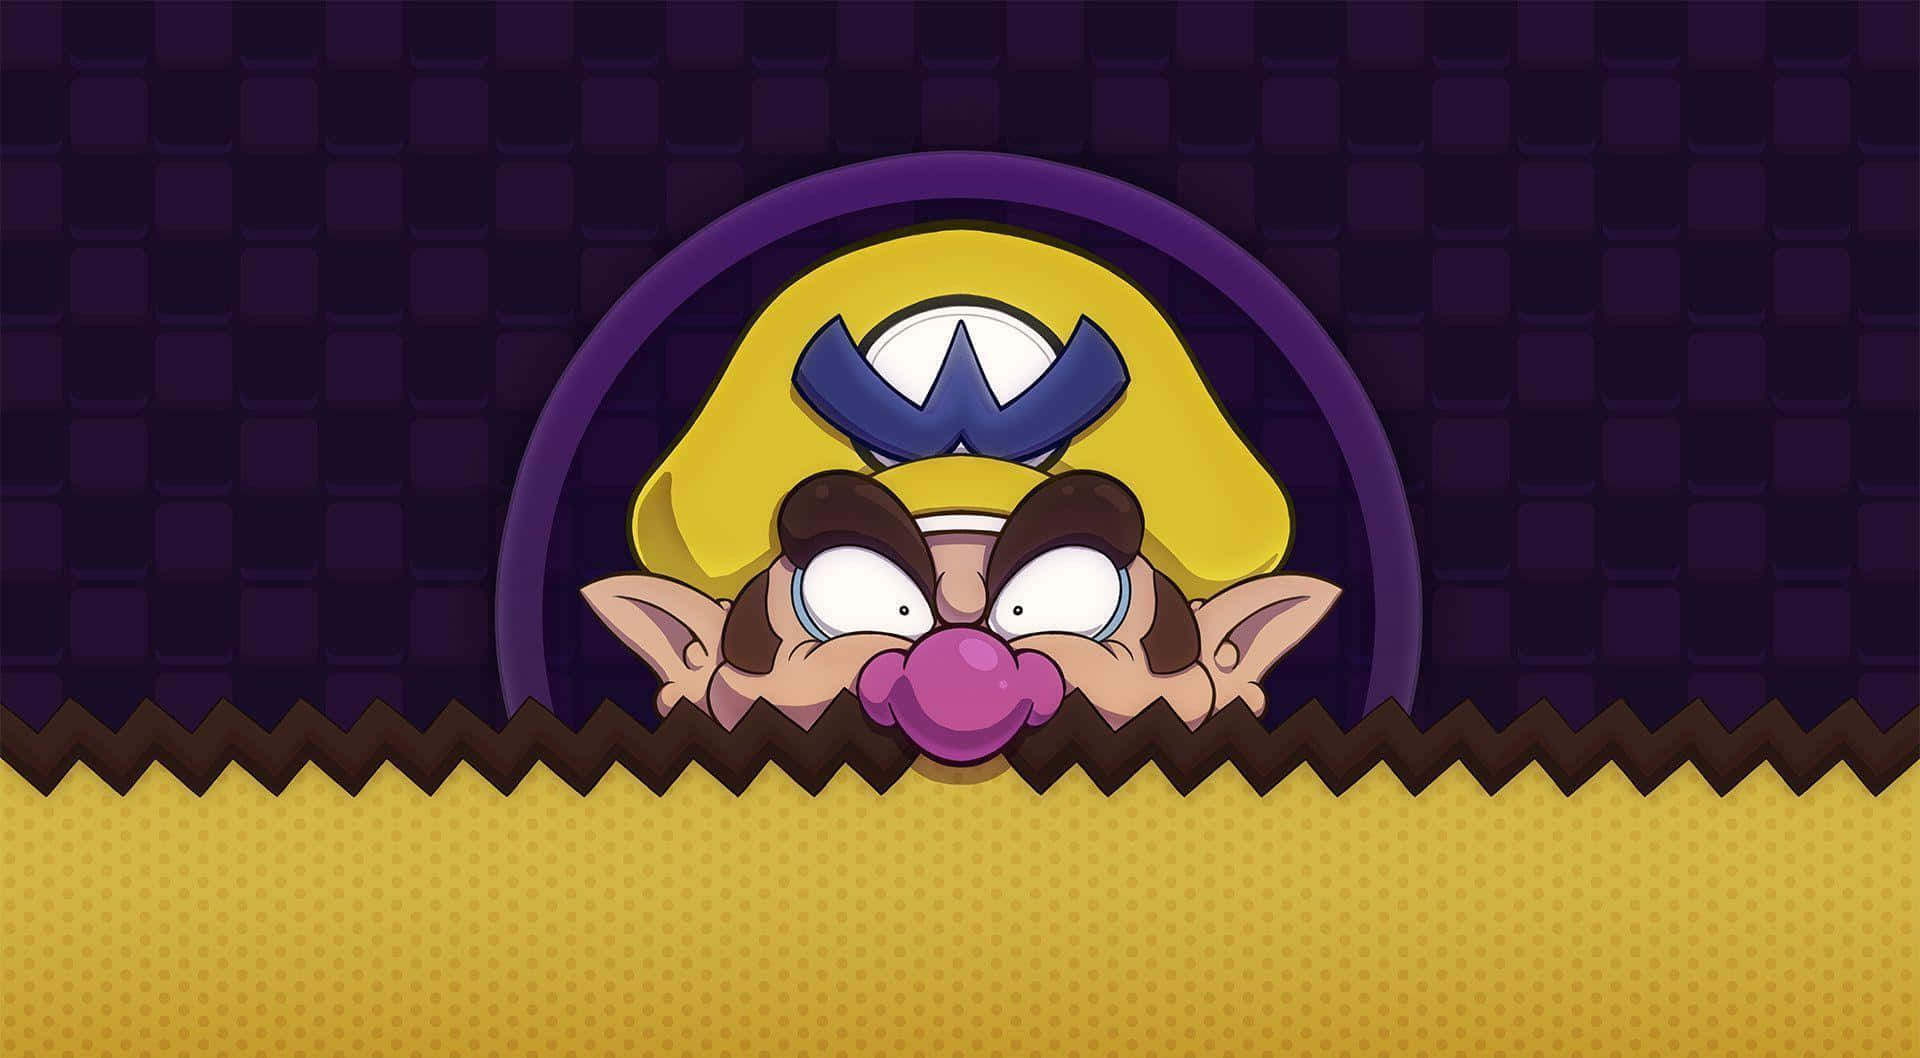 Wario Smirking Mischievously In His Iconic Outfit Background